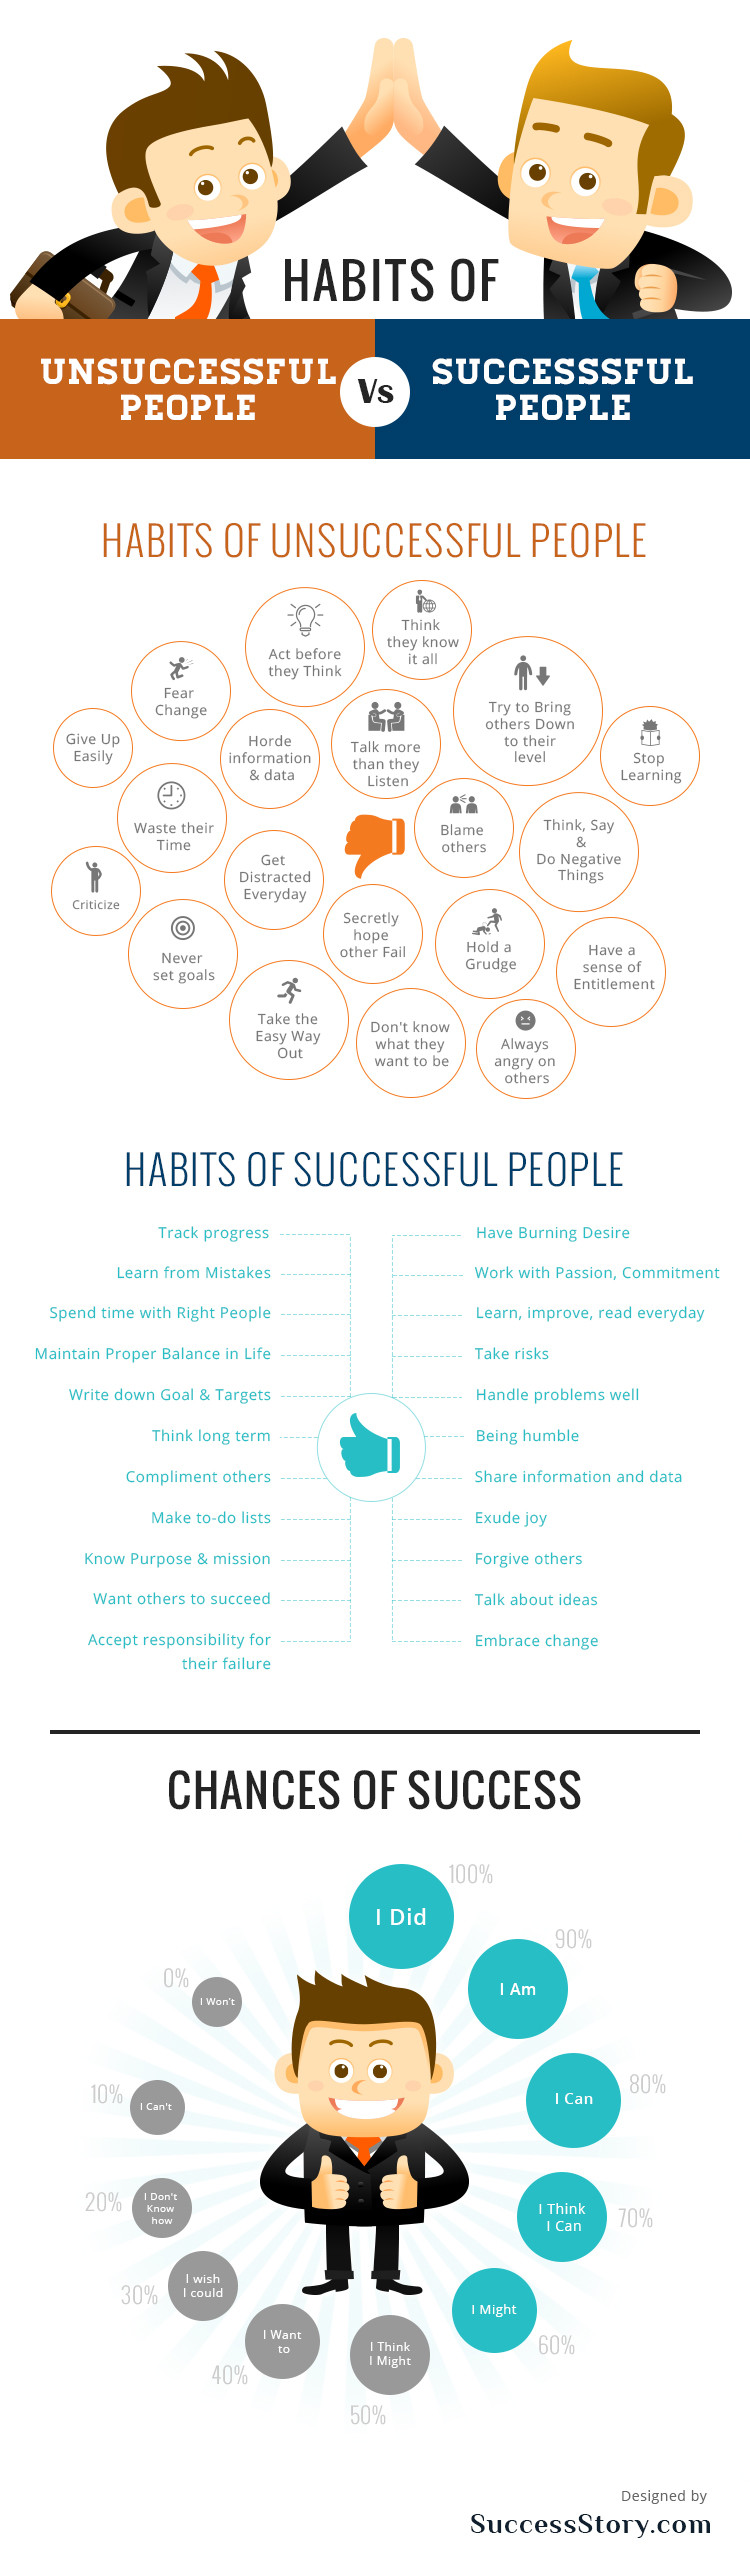 Successful vs. Unsuccessful people - success habits for investing and trading